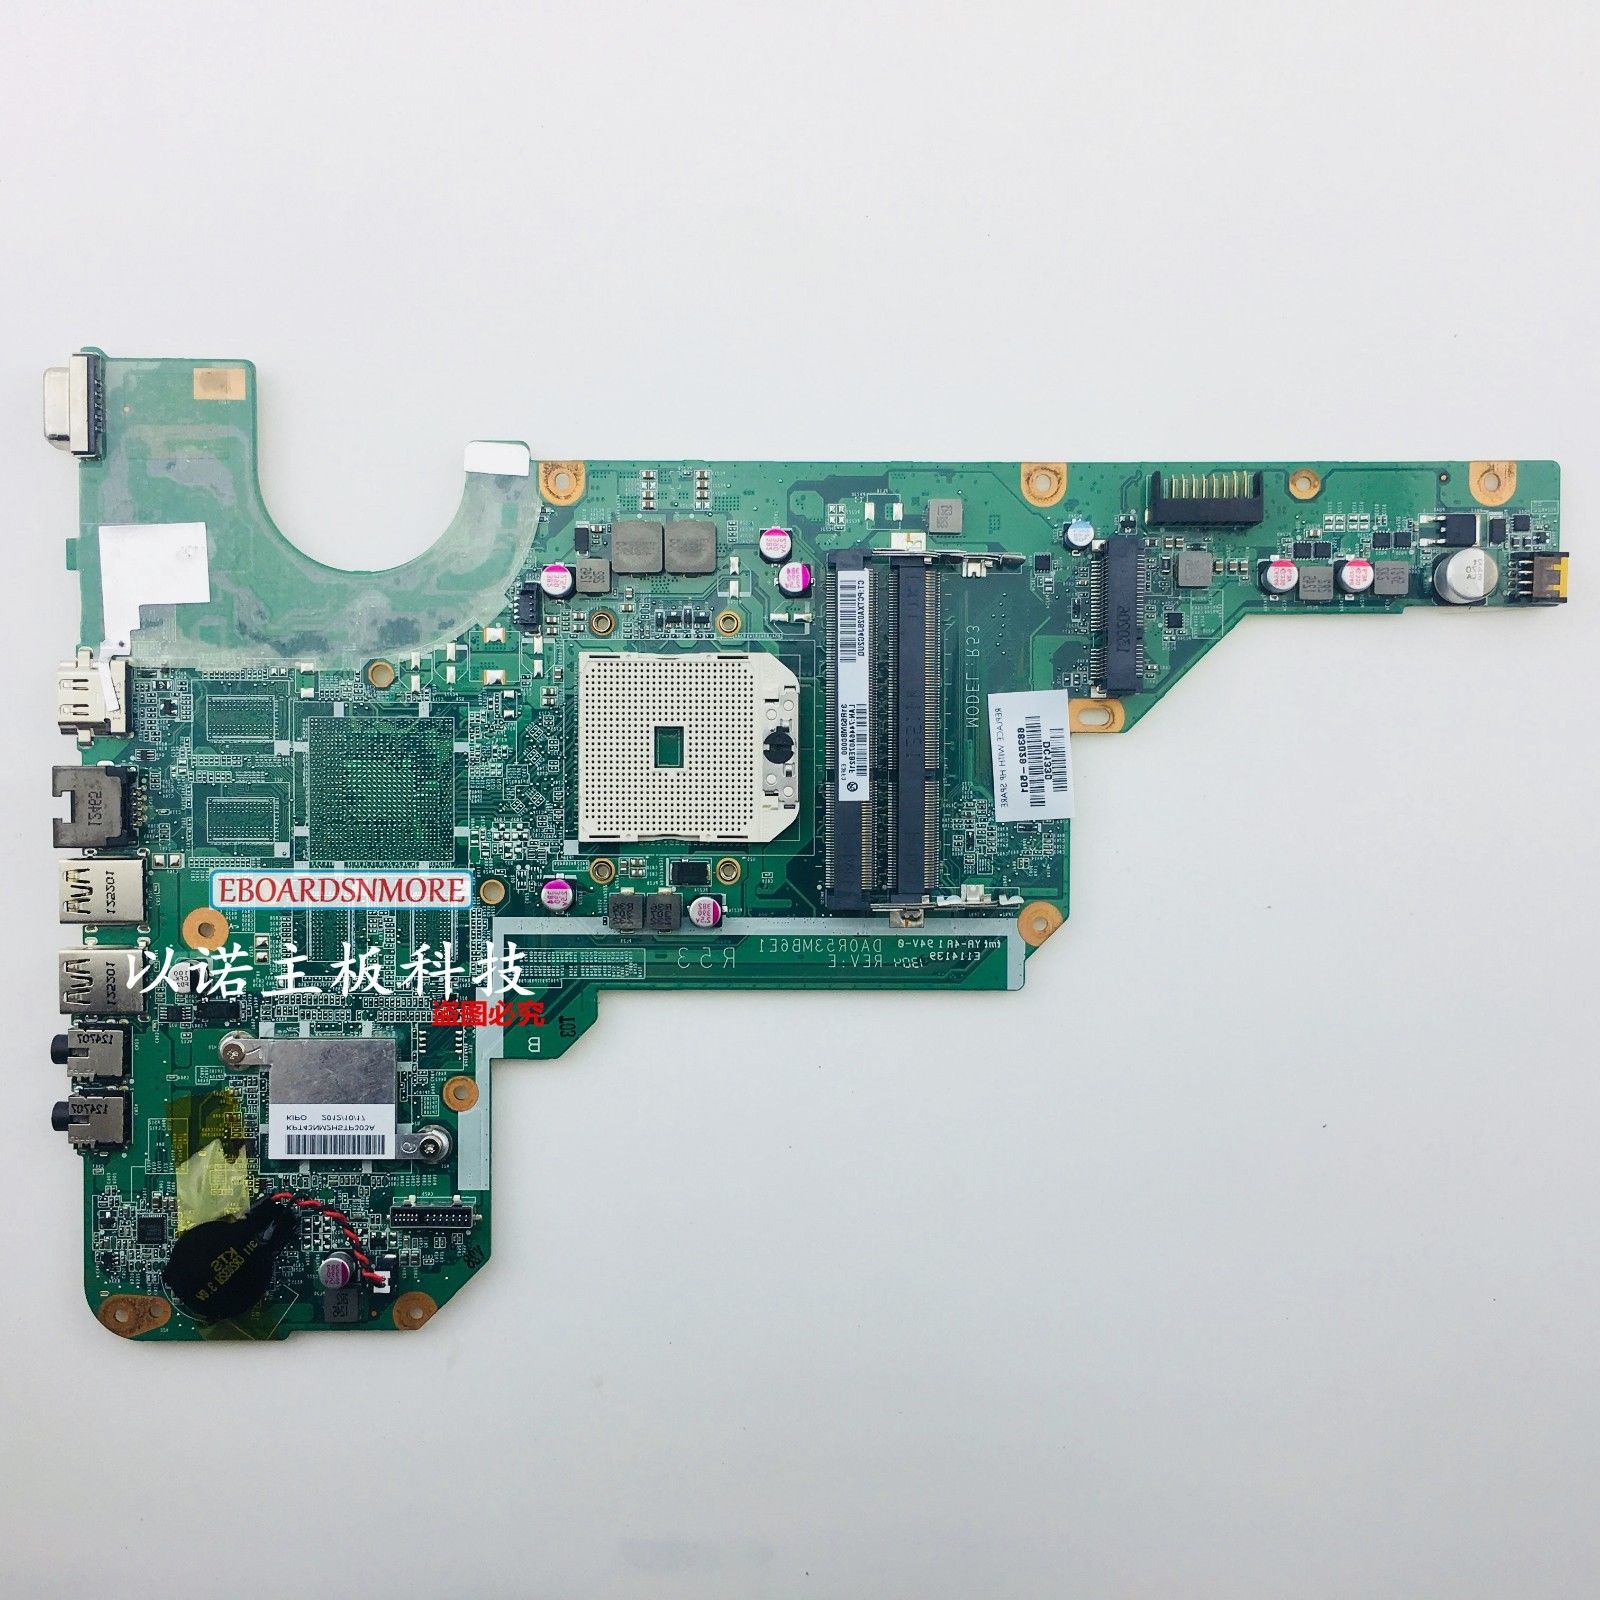 683029-501 683029-001 AMD Motherboard For HP Pavilion G6-2200 -2300 Laptops, A 683029-501 683029-001 AMD INT - Click Image to Close